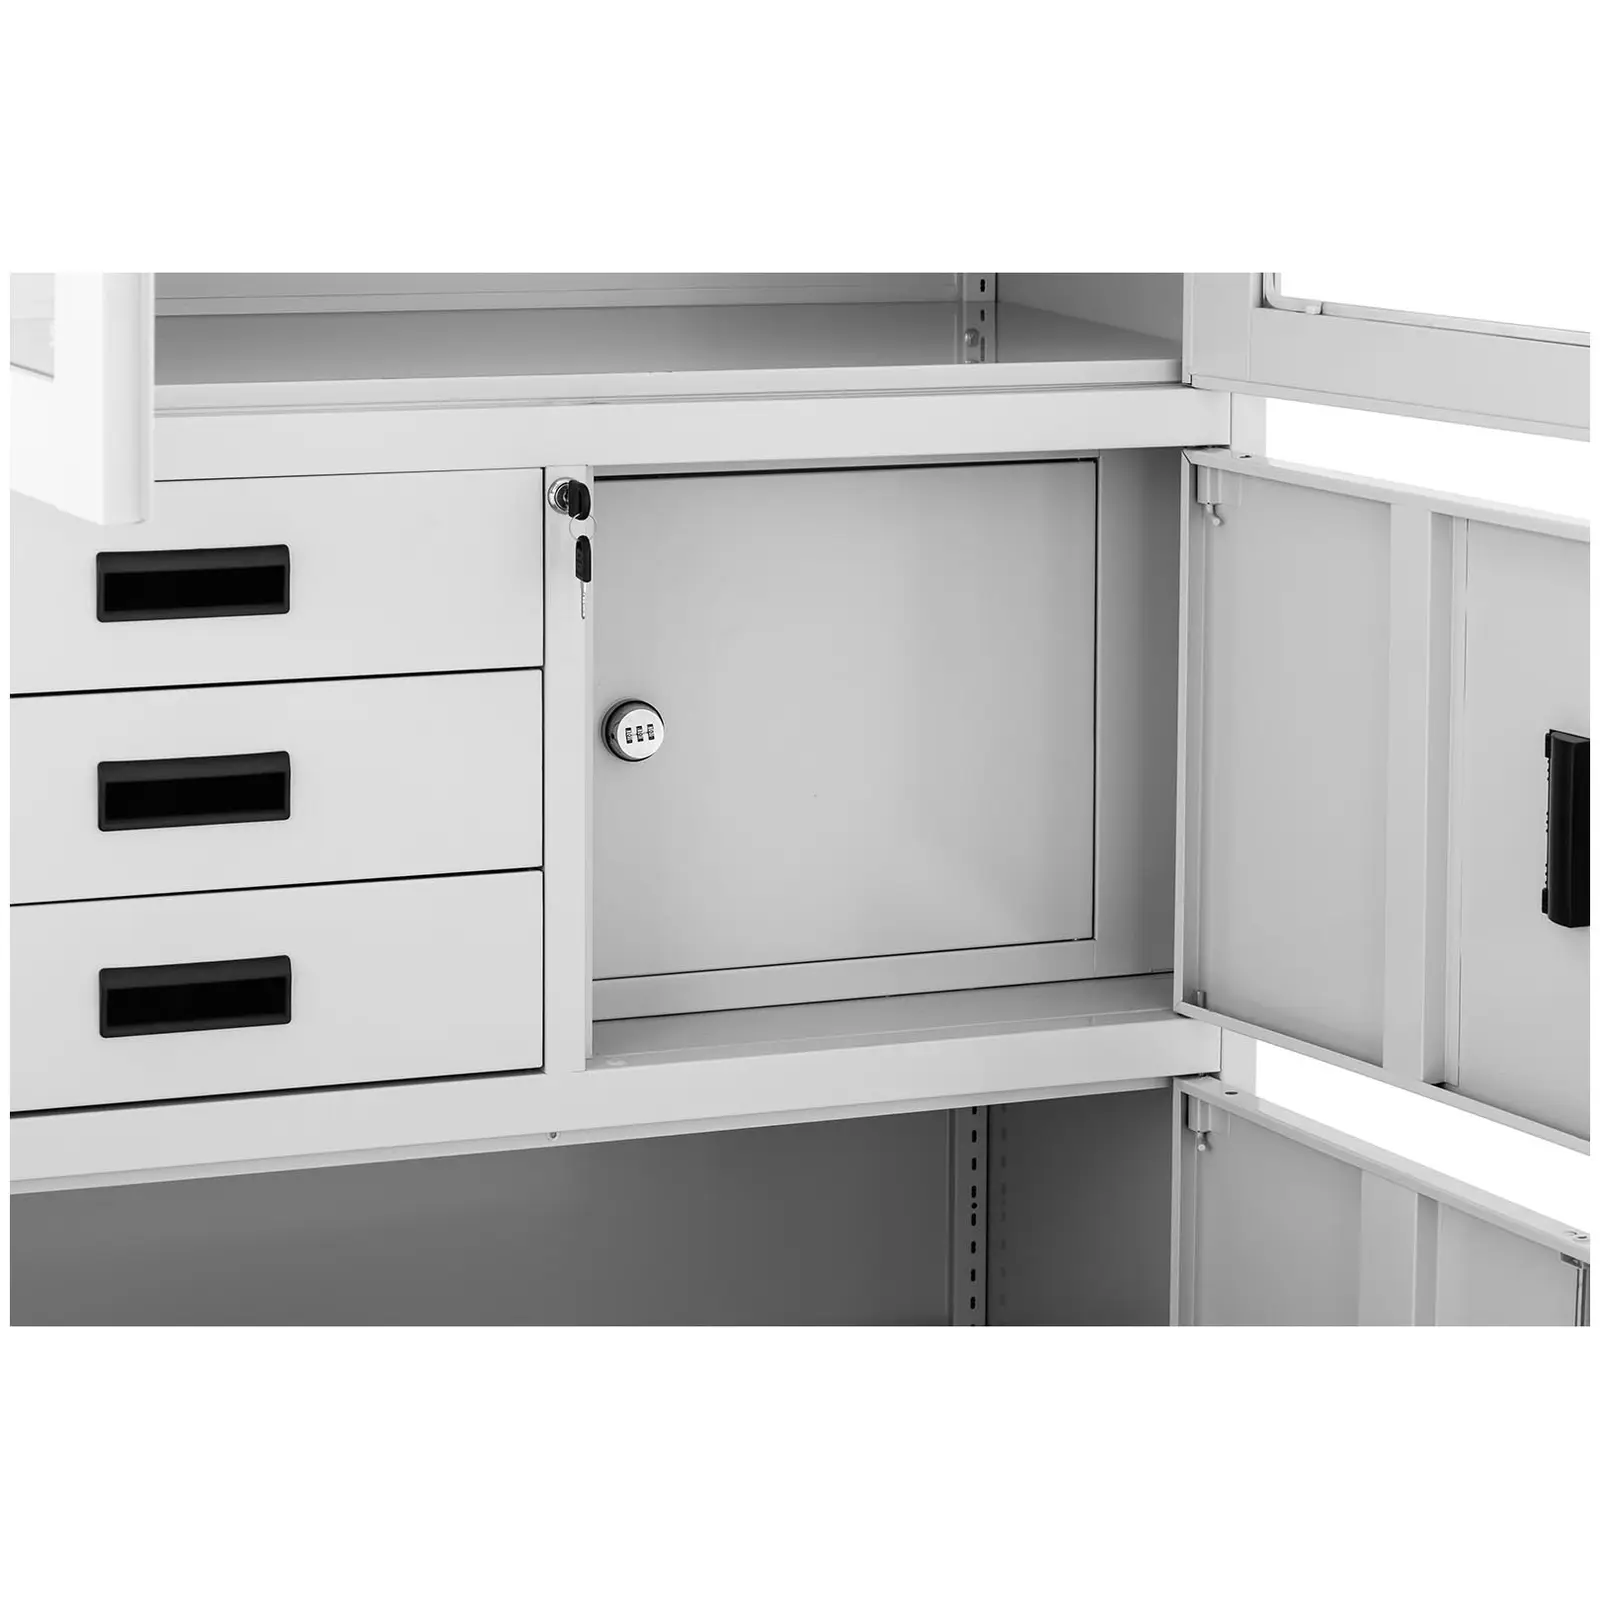 Filing Cabinet - 90 x 40 x 180 cm - 3 drawers - safe